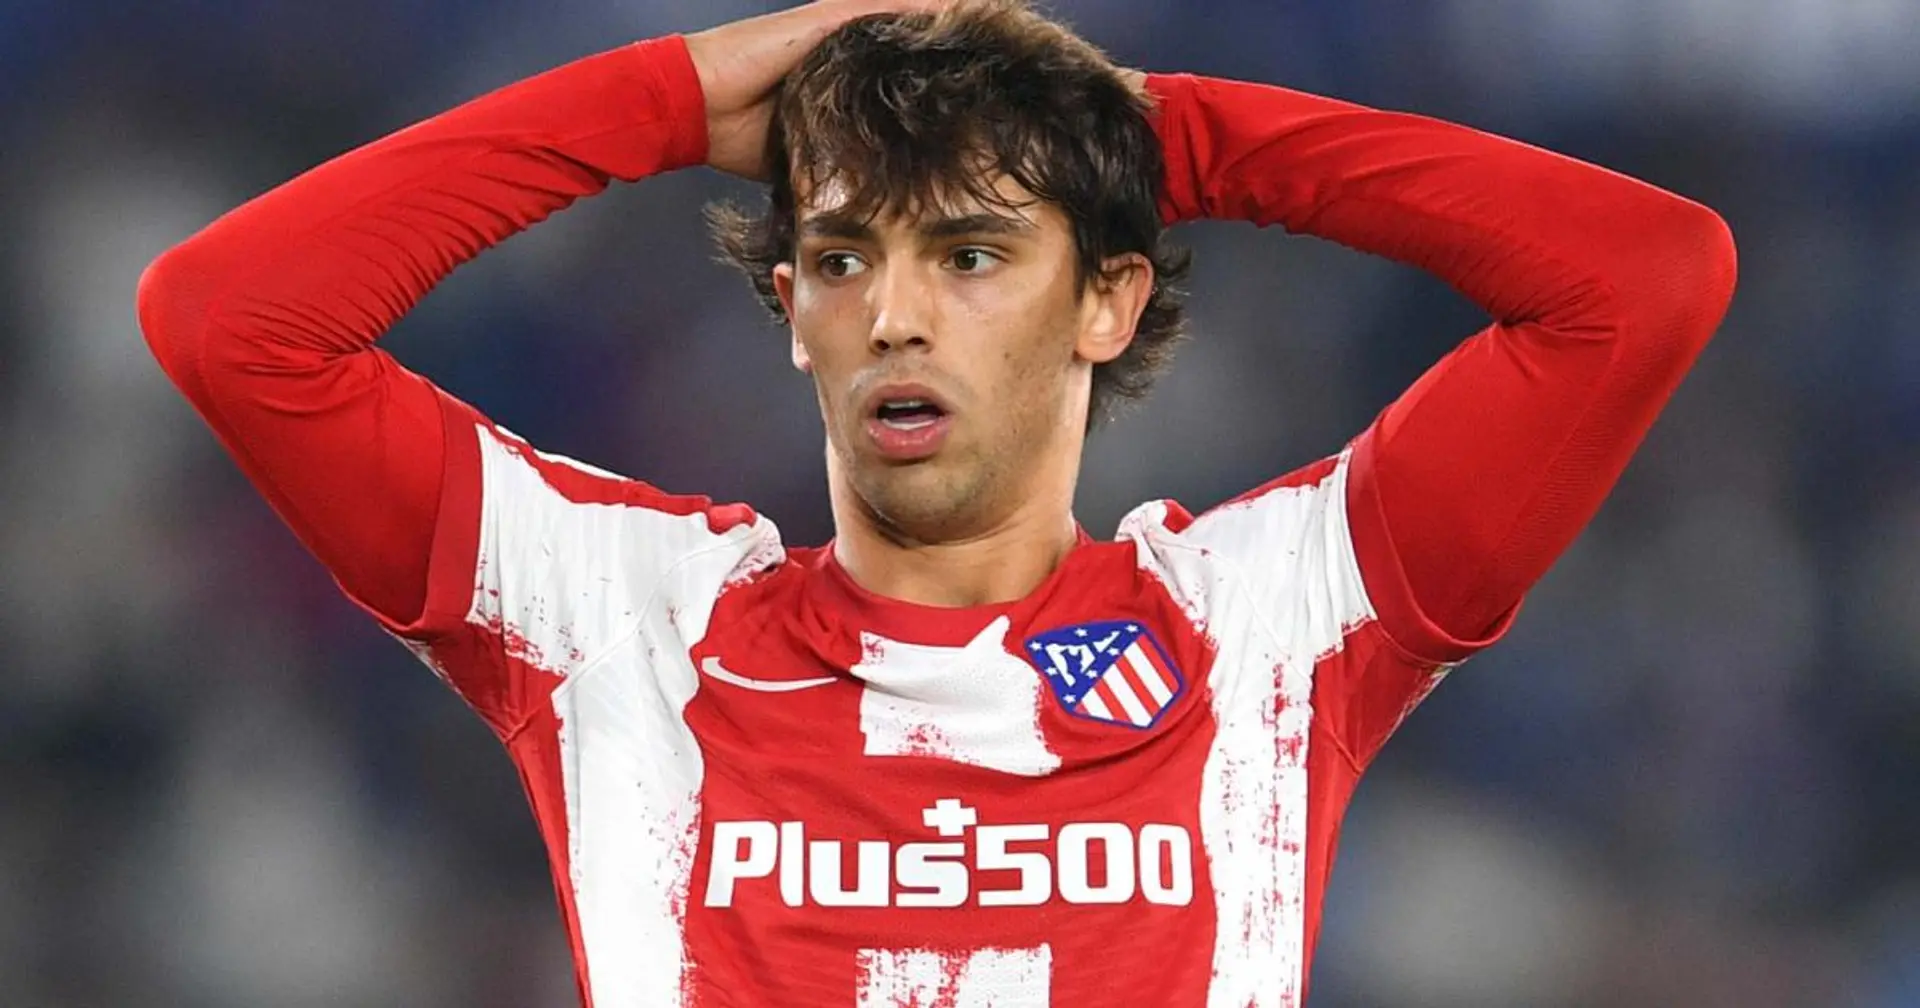 Diario AS: Man United face '3-way fight' to sign Joao Felix in January (reliability: 4 stars)